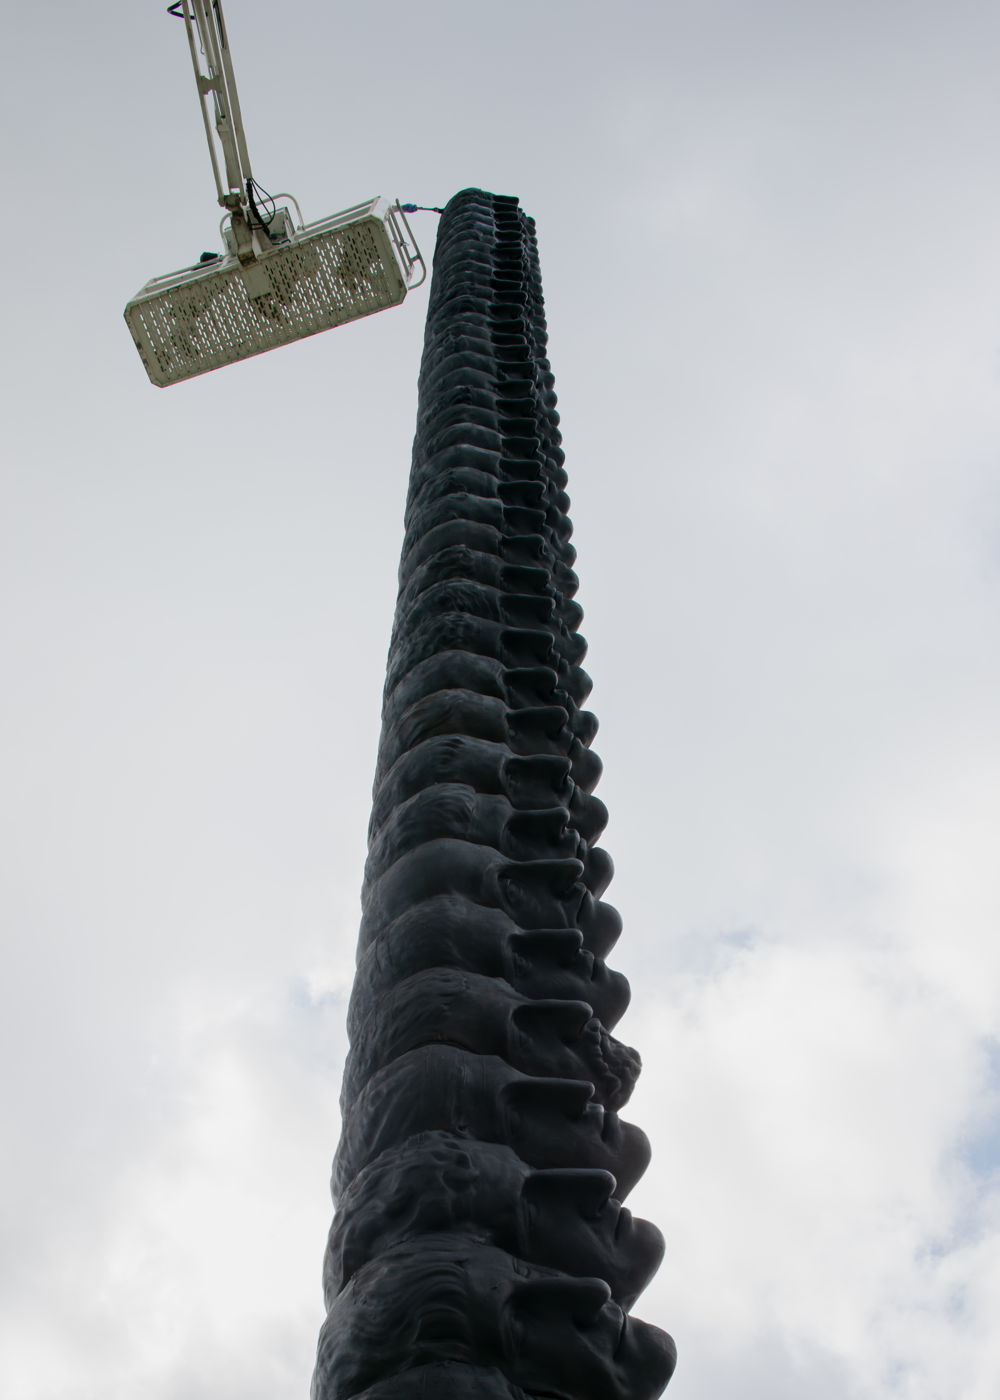 06. THOMAS LEROOY, Tower, 2020. Image by Jeroen Verrecht